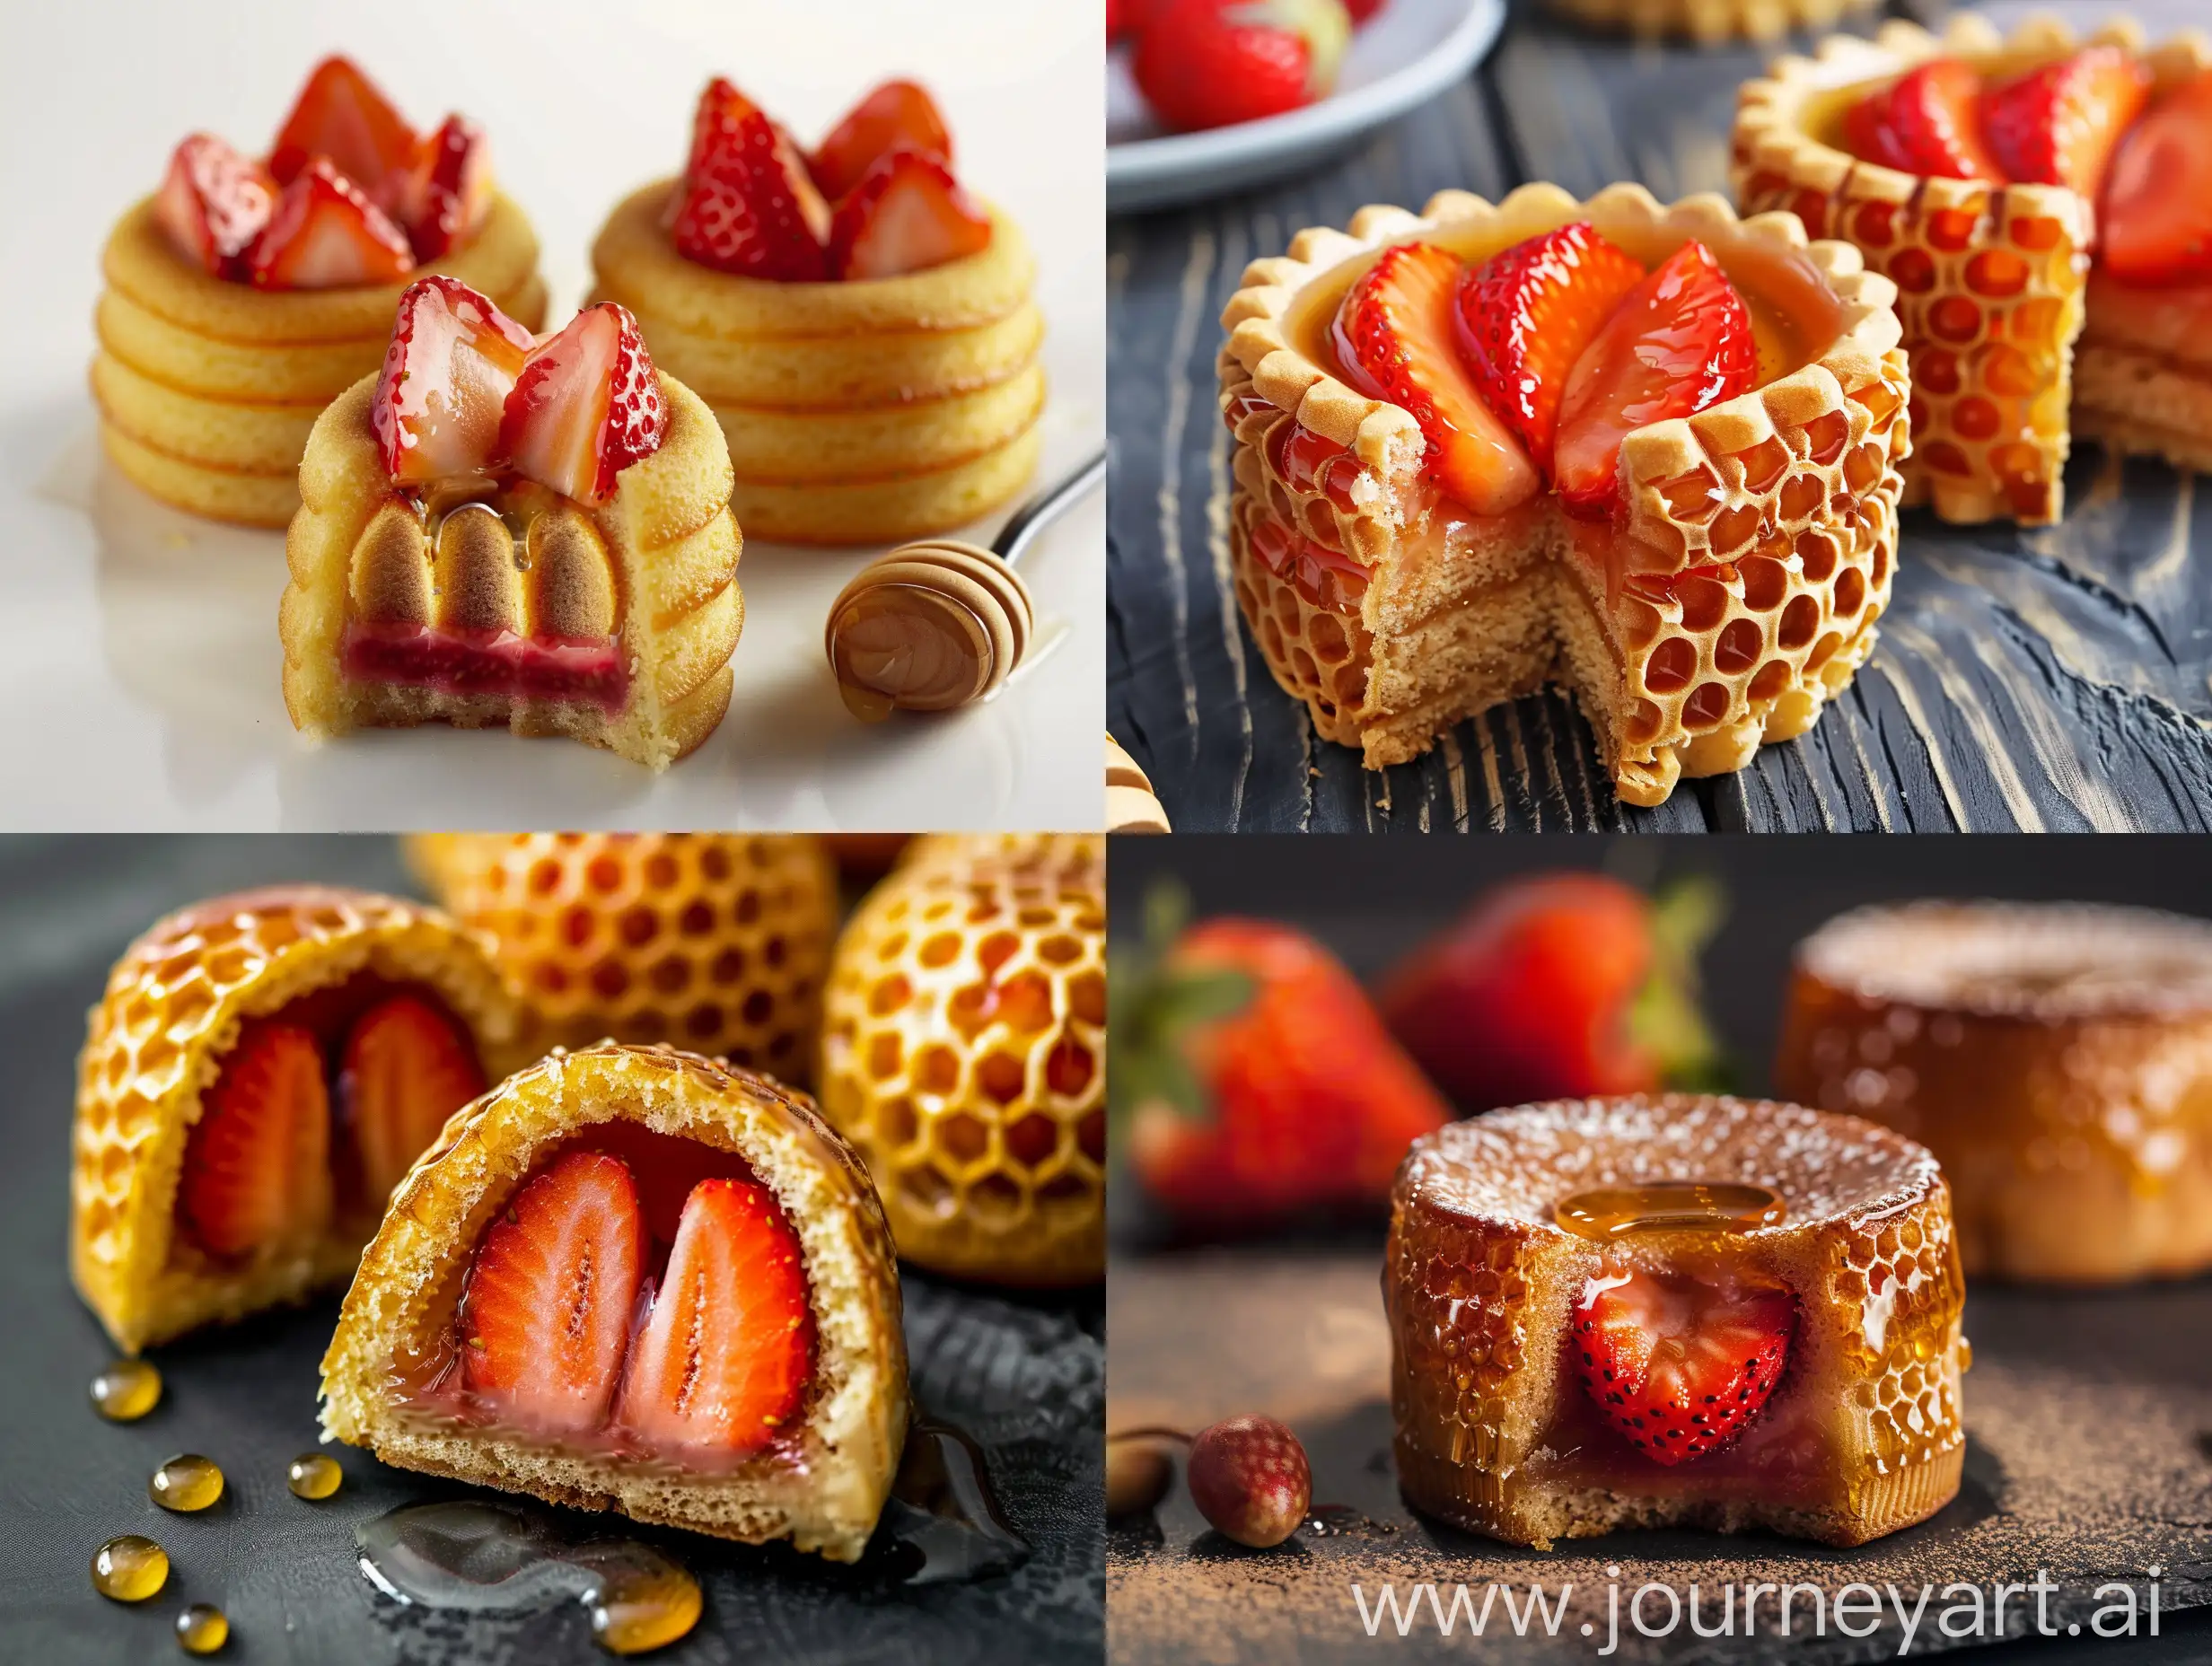 Delicious-Honey-Cake-Dessert-with-Strawberry-Filling-Perfect-Gift-for-Him